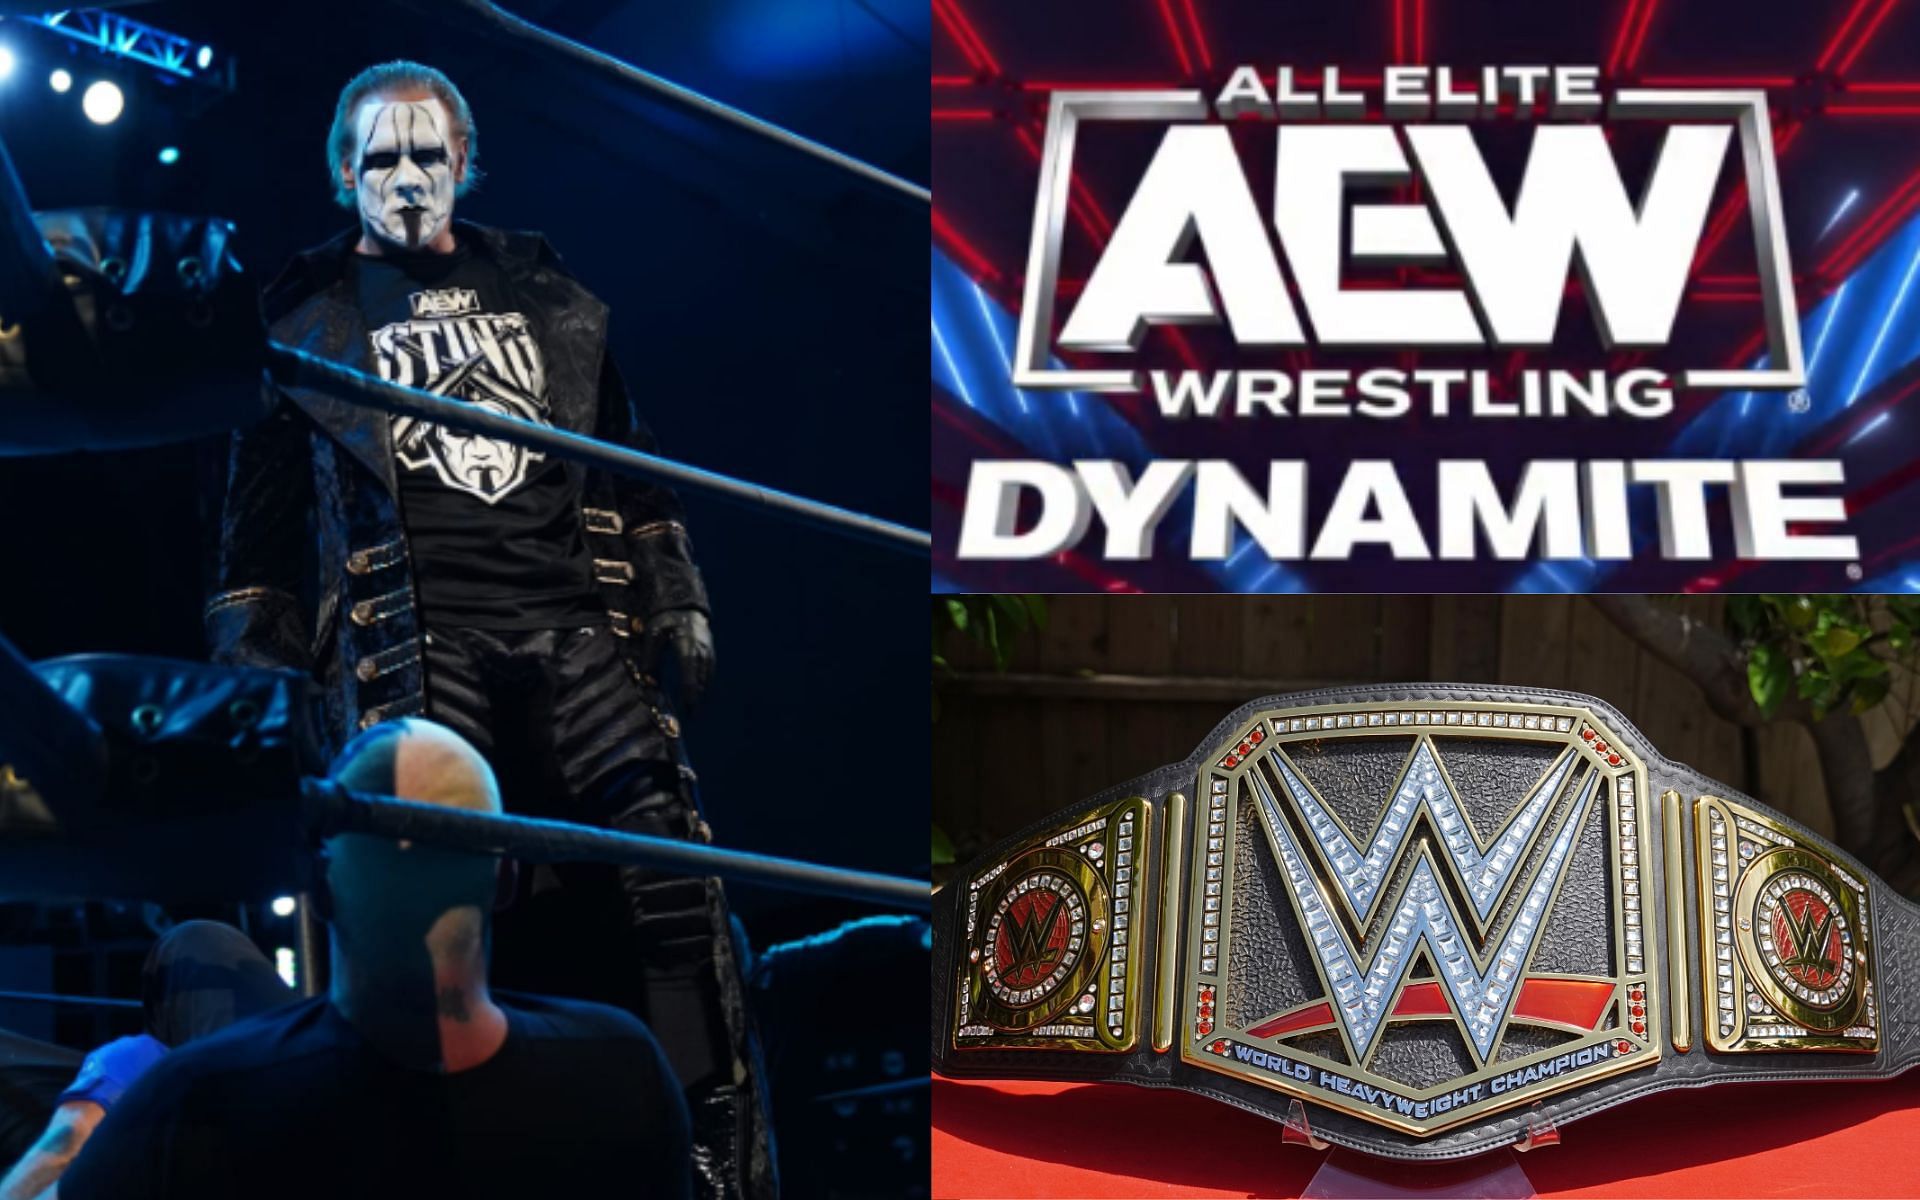 Sting brought back a decade old moniker on AEW Dynamite